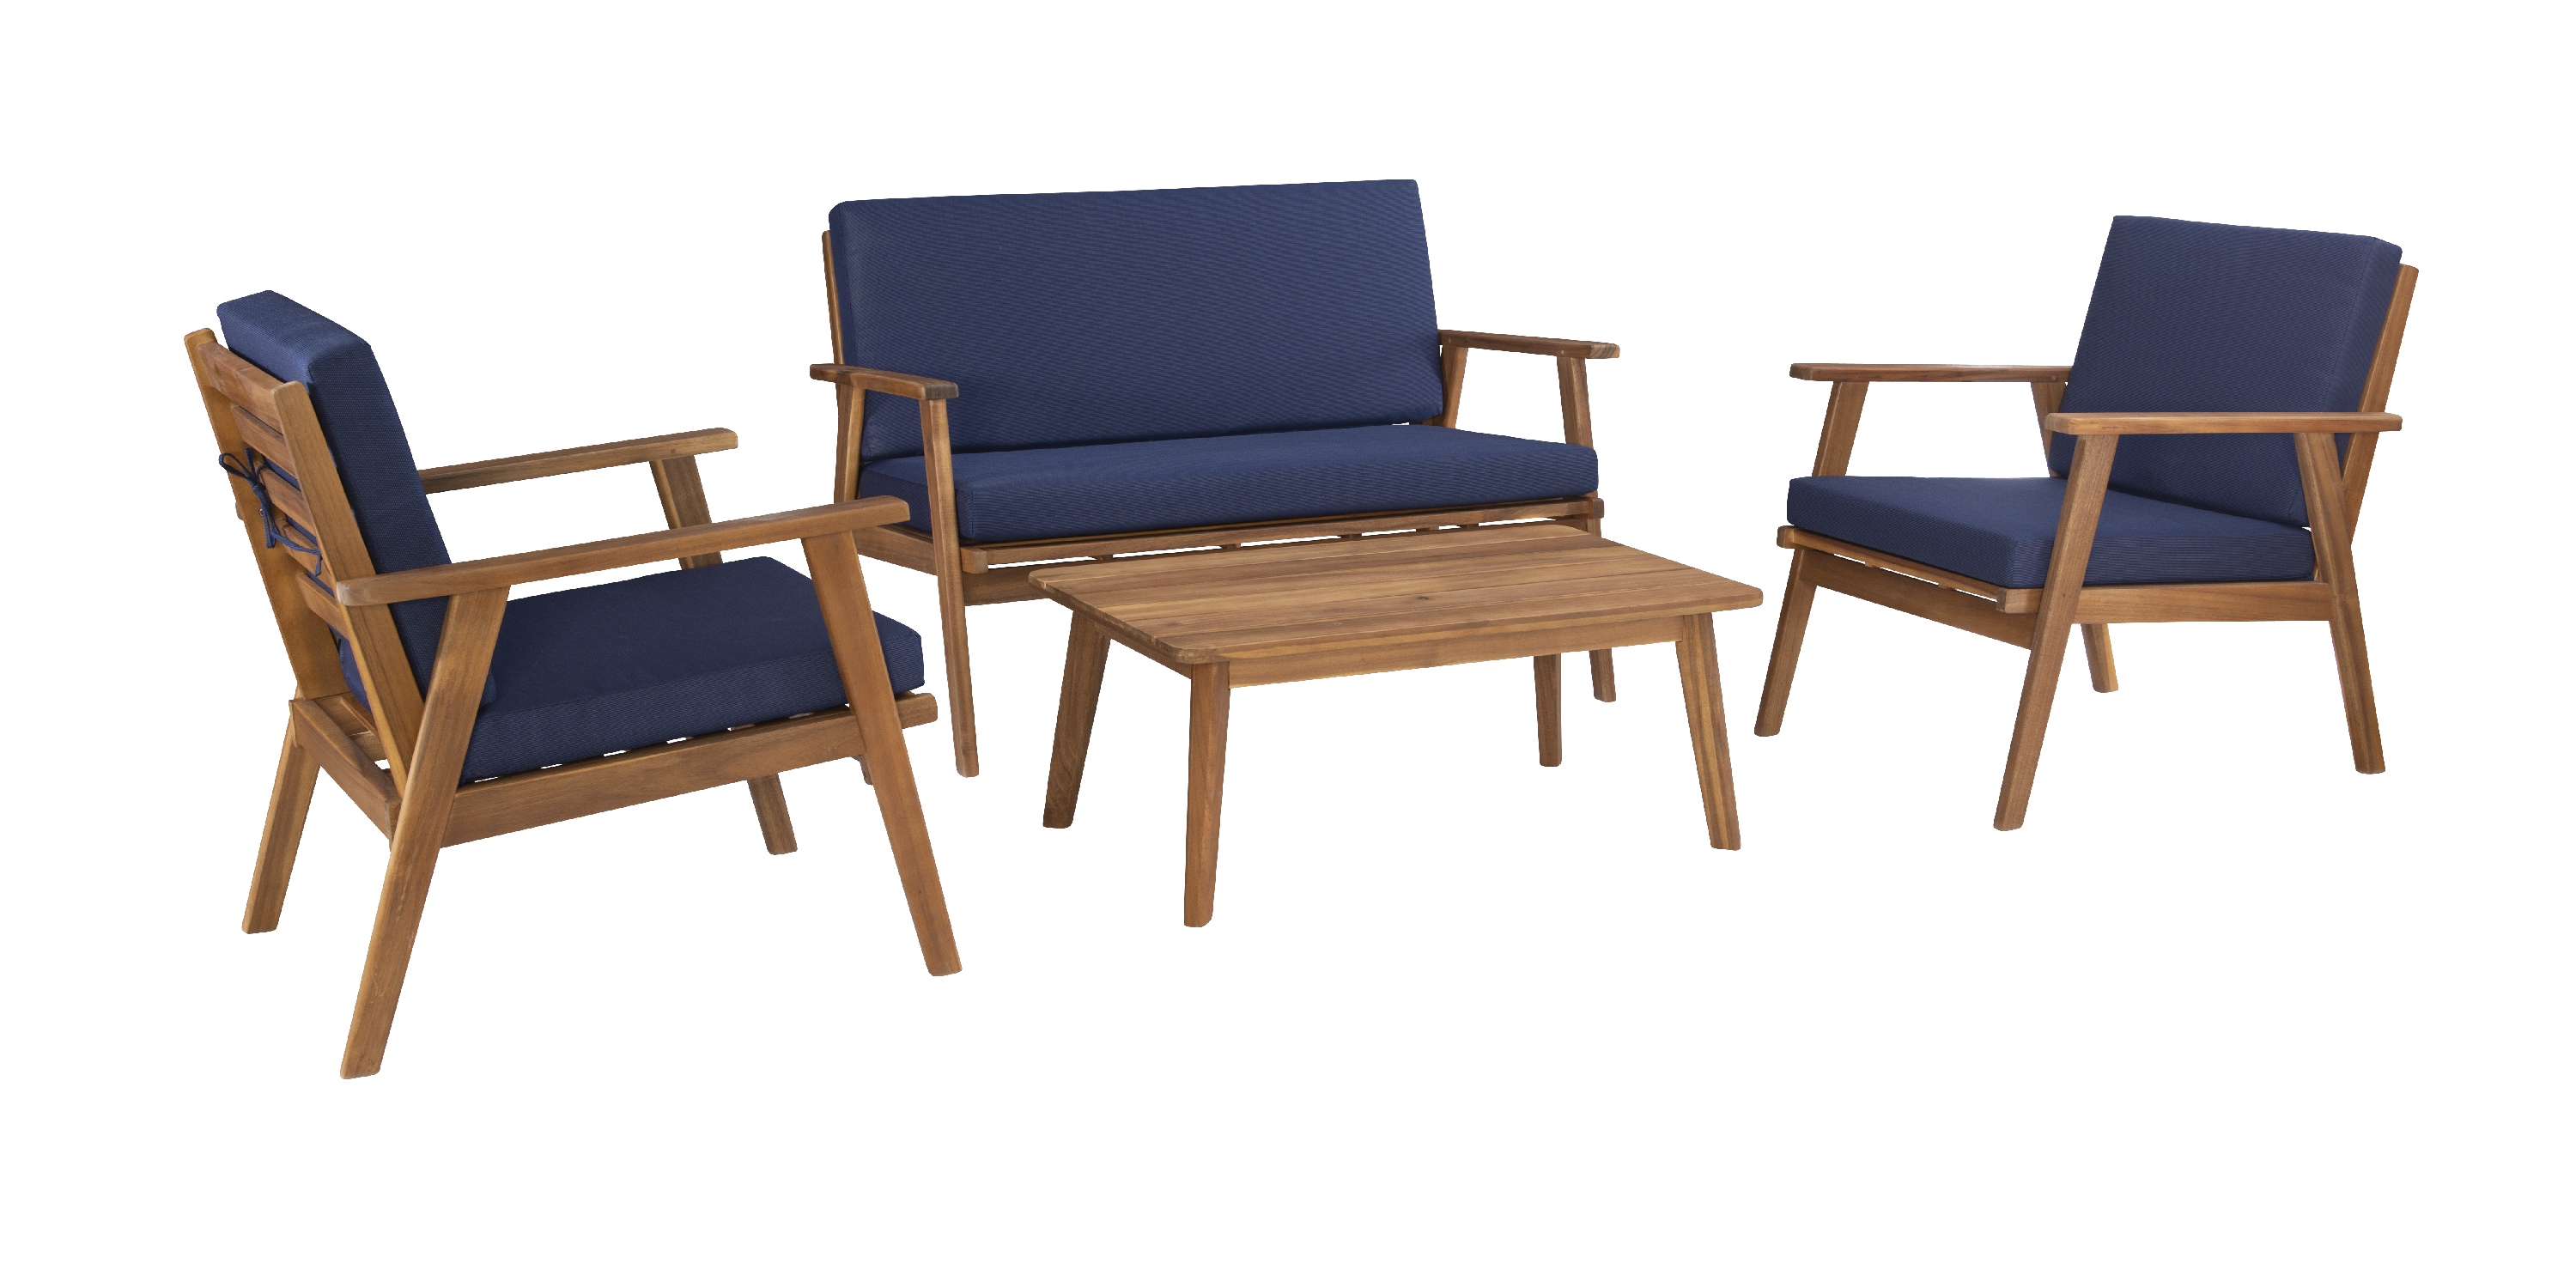 Linon Cole Outdoor Chat 4-Piece Seating Set, Brown Finish with Blue Fabric - image 3 of 32